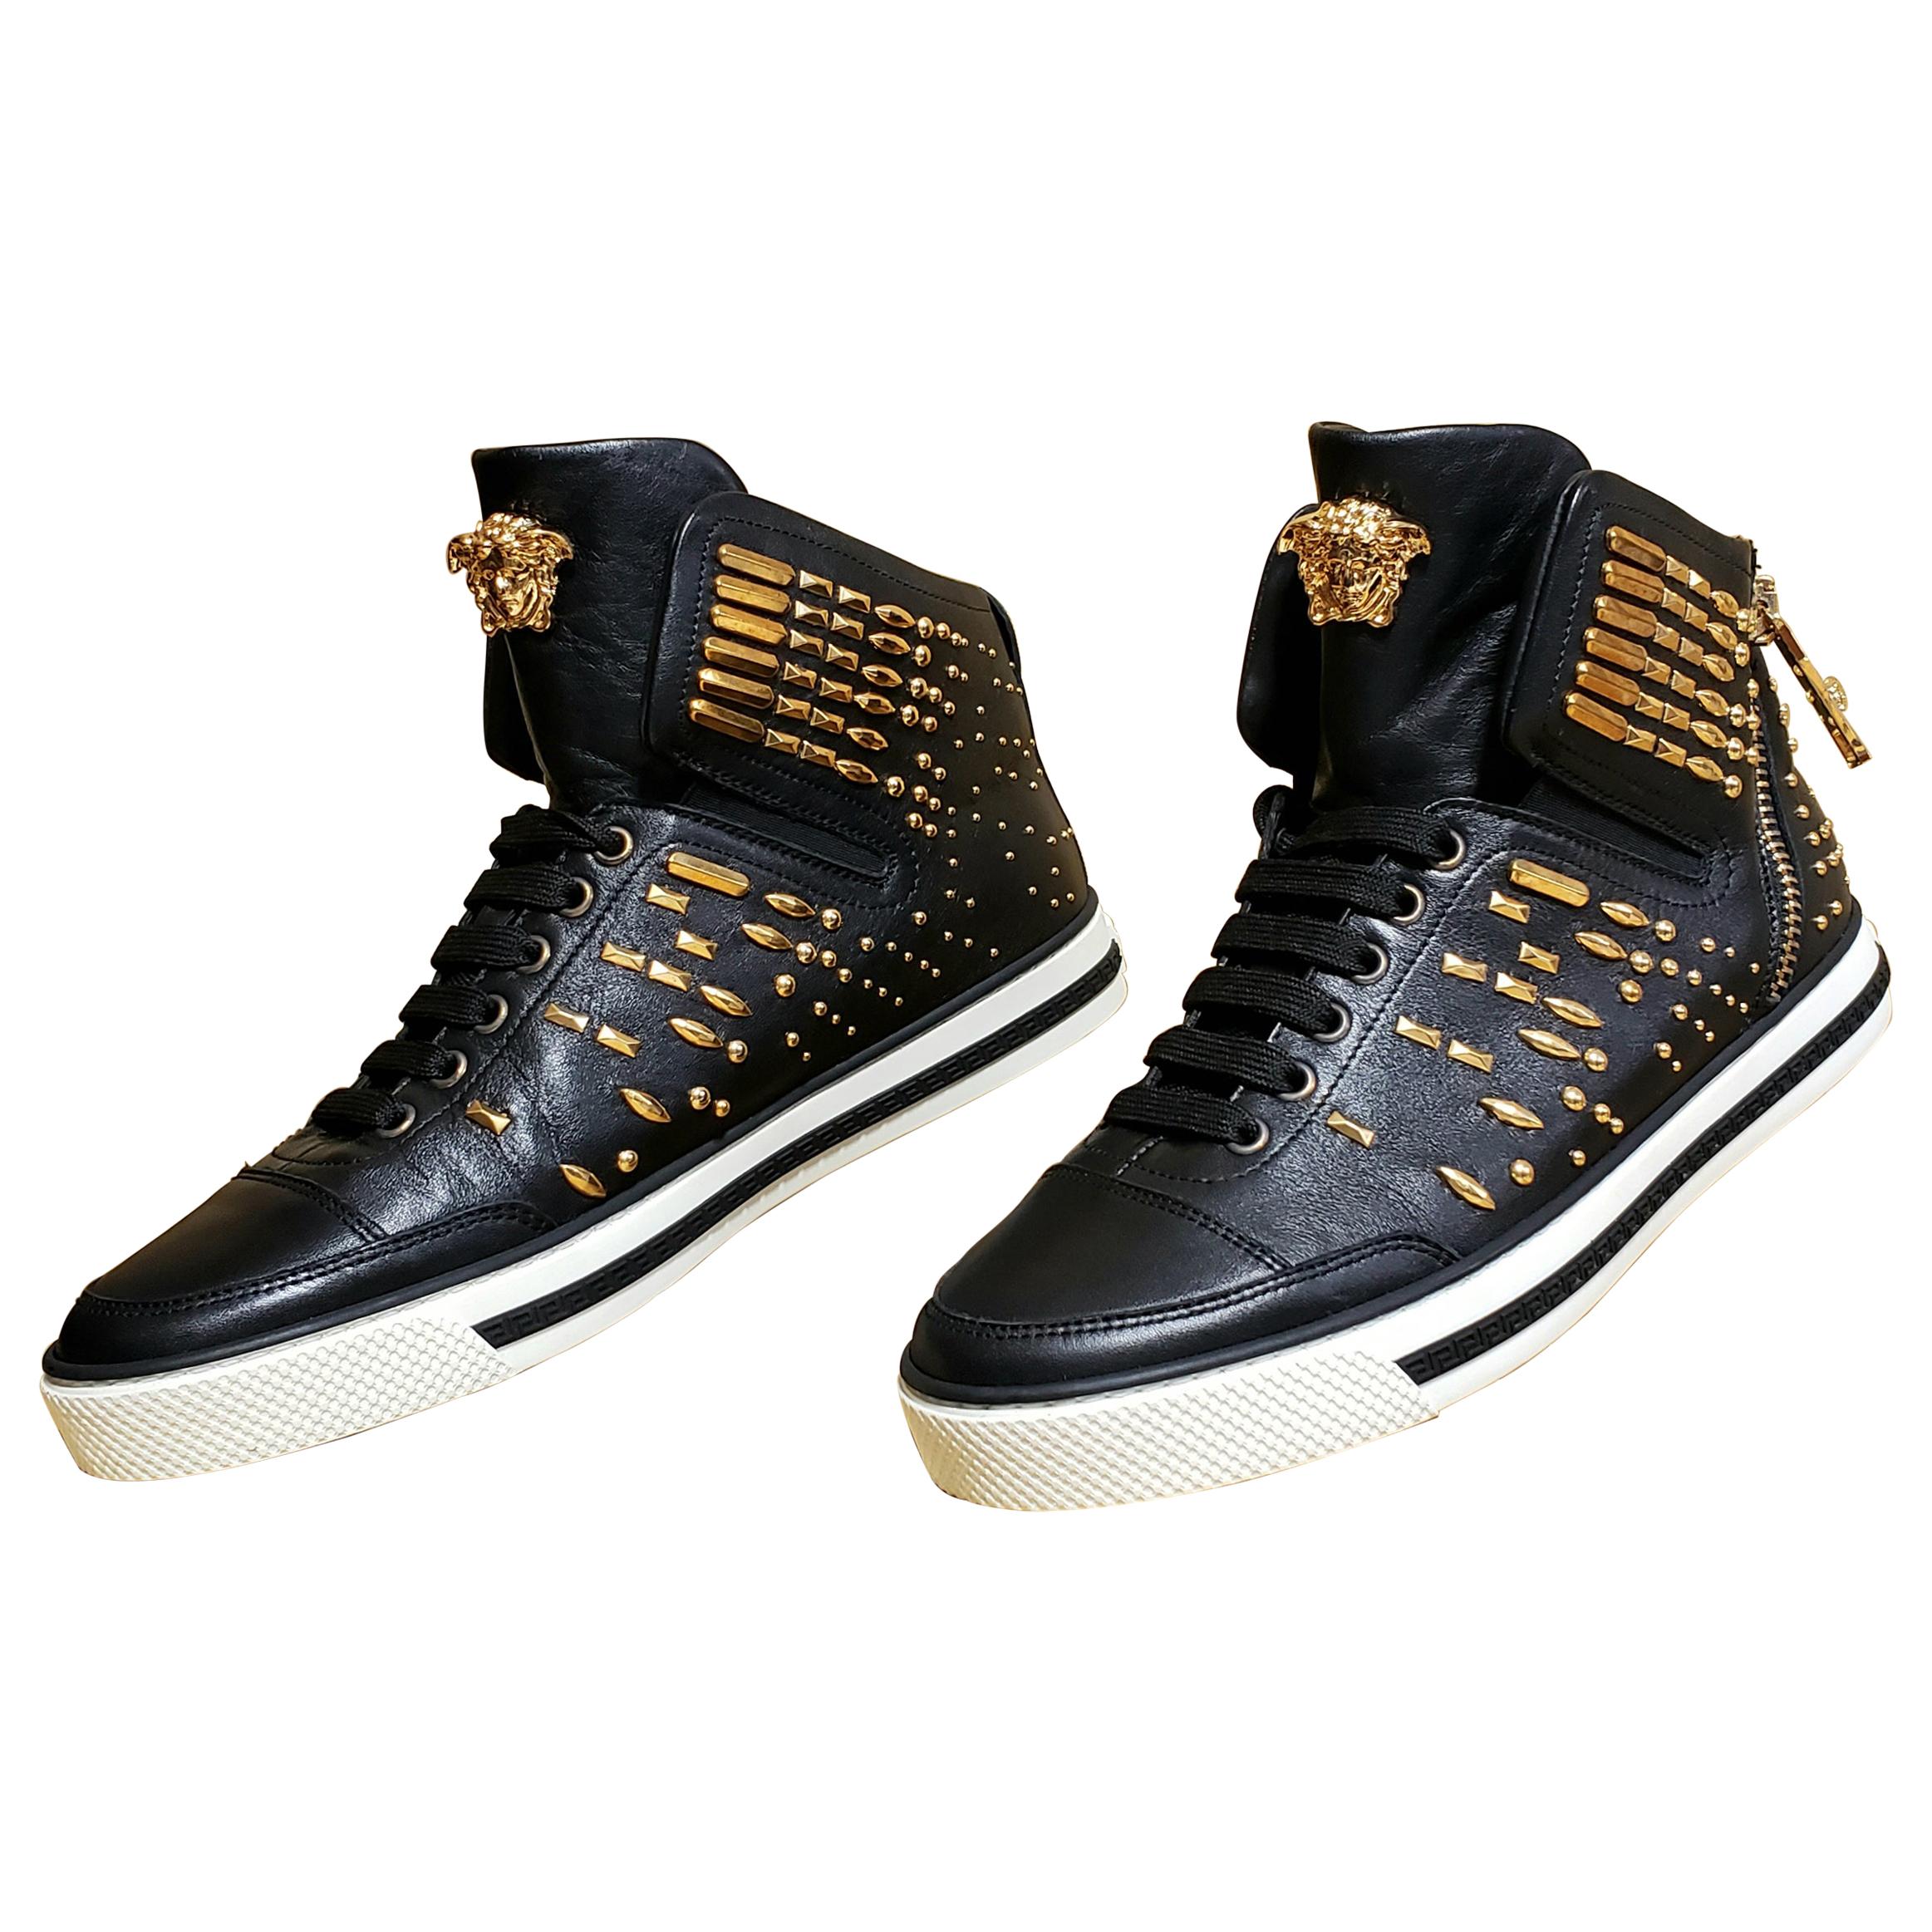 VERSACE STUDDED HIGH-TOP SNEAKERS with GOLD MEDUSA side ZIPPER at 1stDibs |  versace medusa shoes, versace high top sneakers, black and gold high tops